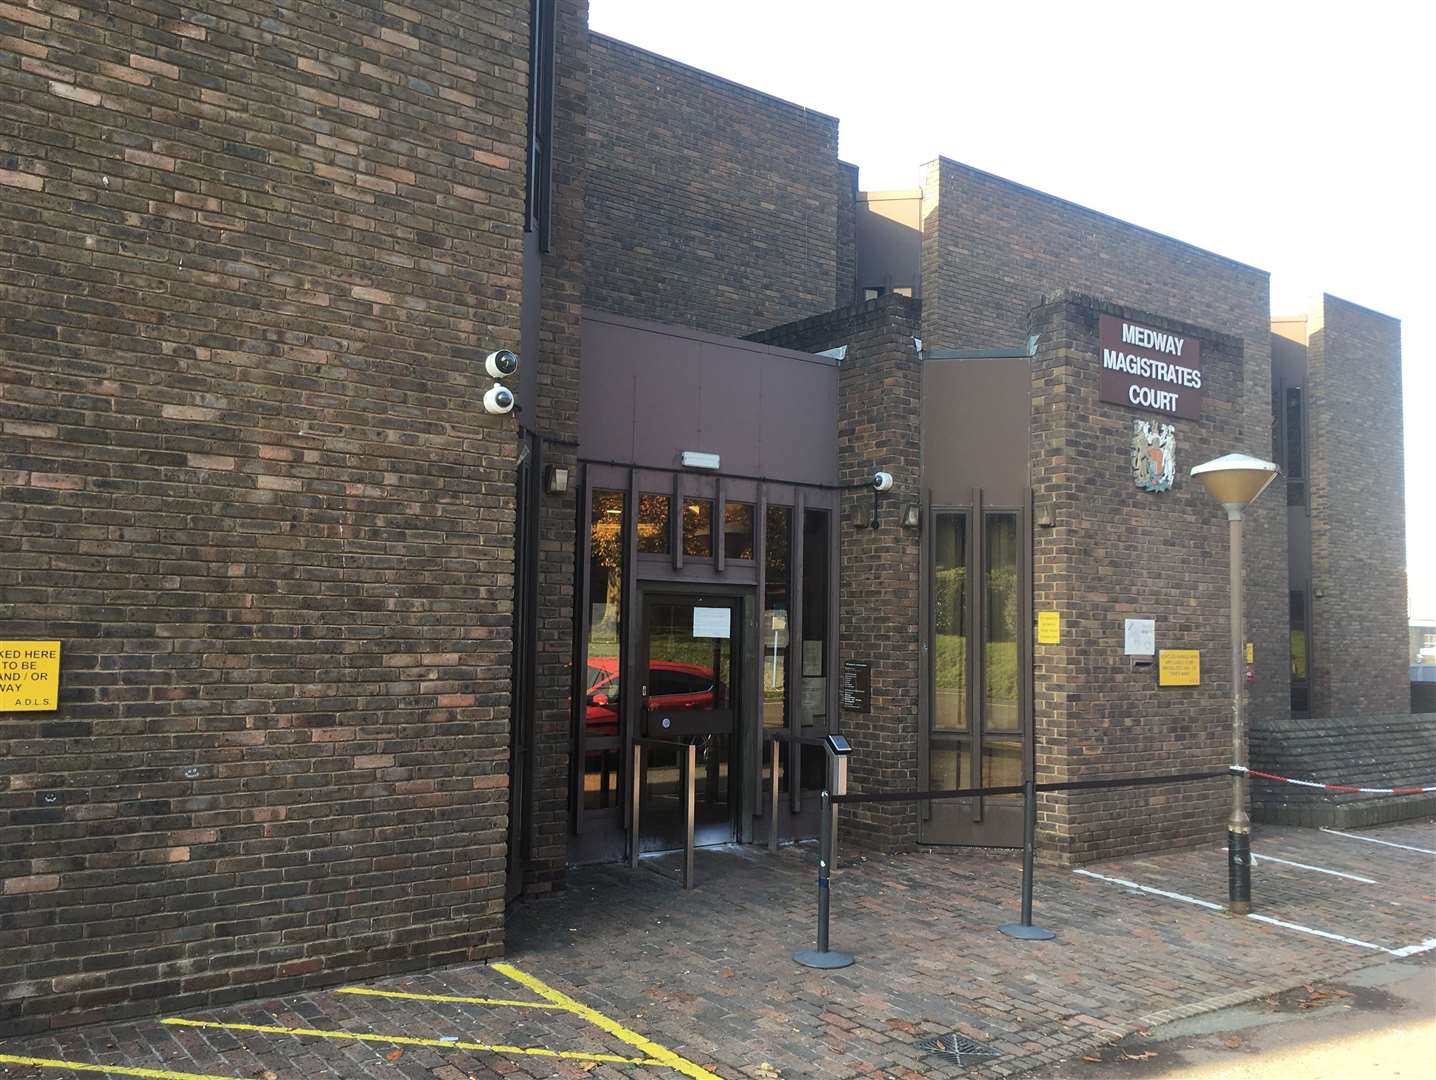 Ollie Adams was sentenced at Medway Magistrates' Court